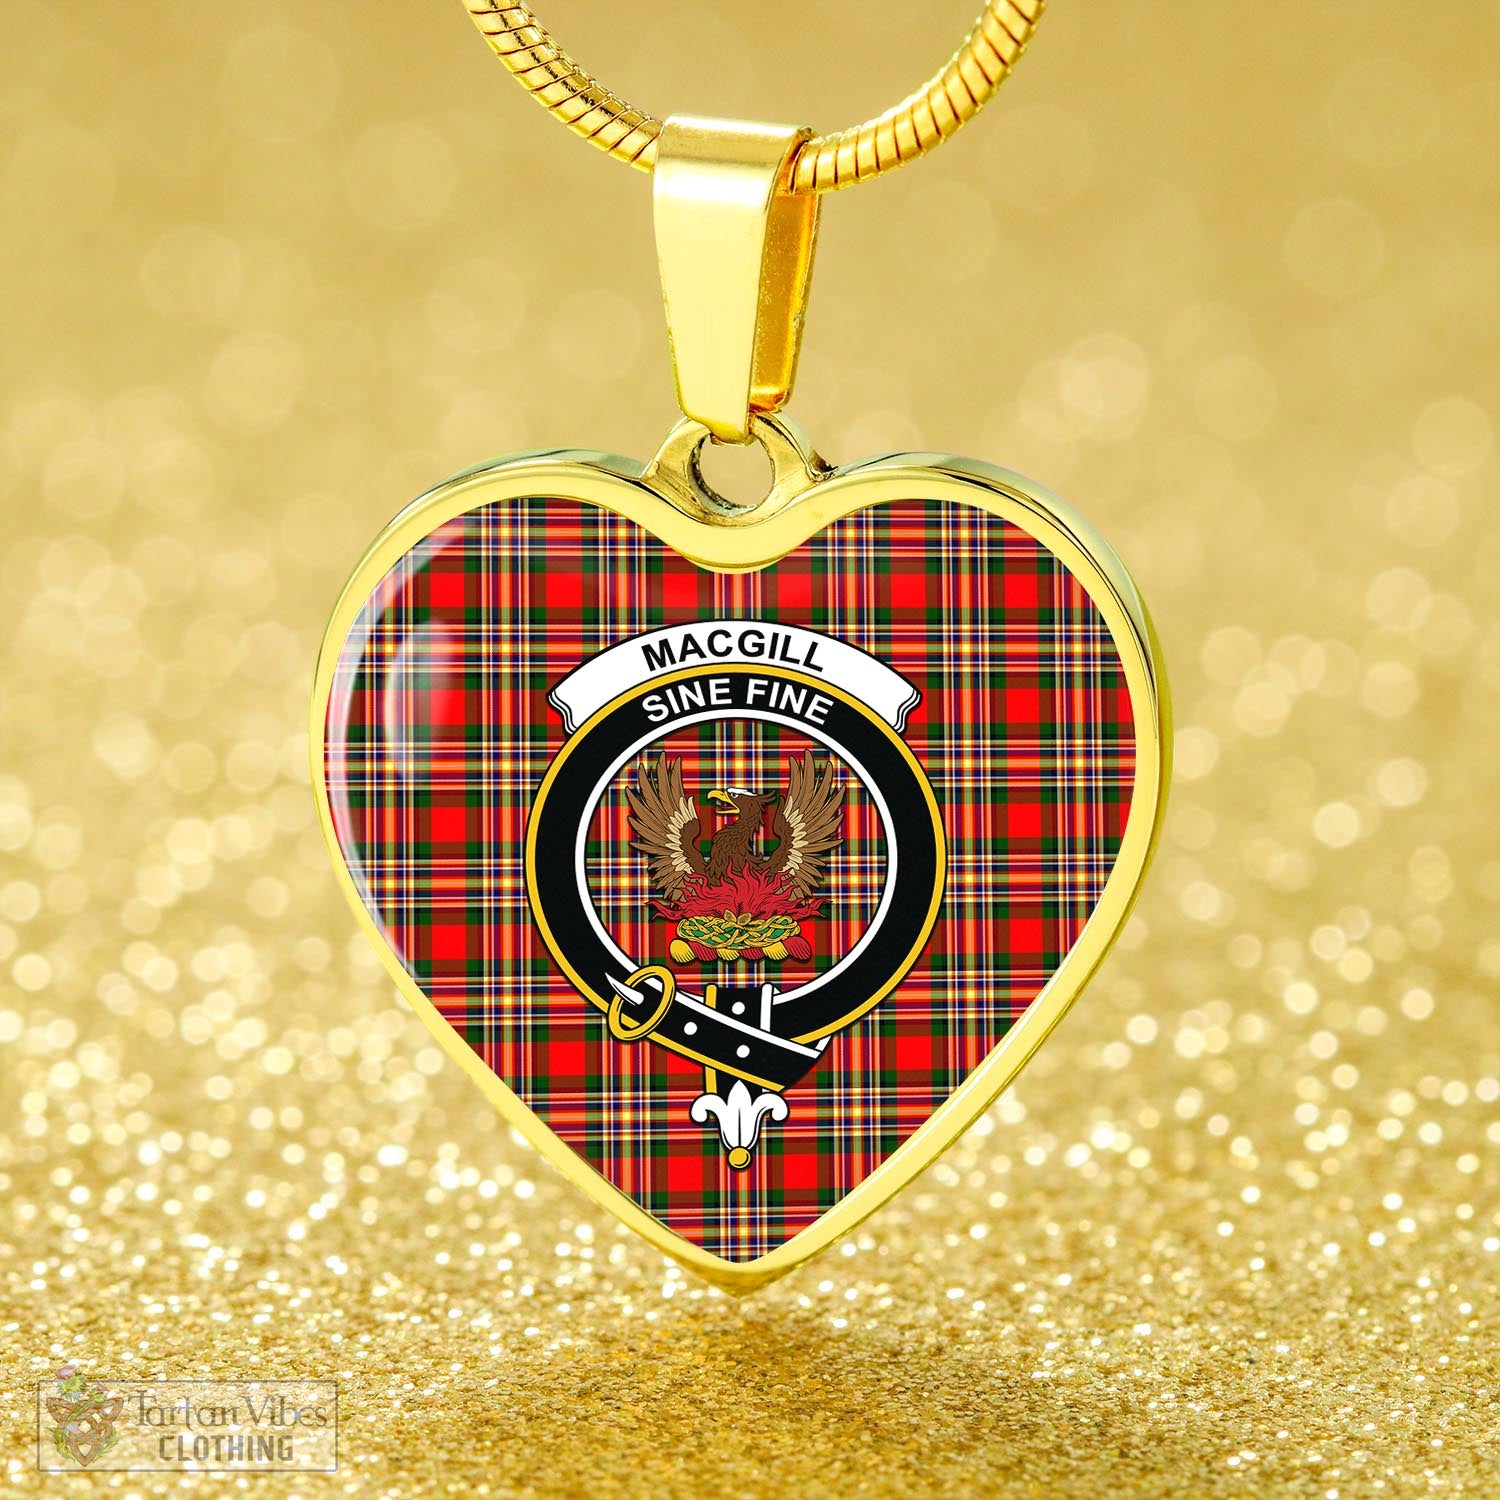 Tartan Vibes Clothing MacGill Modern Tartan Heart Necklace with Family Crest